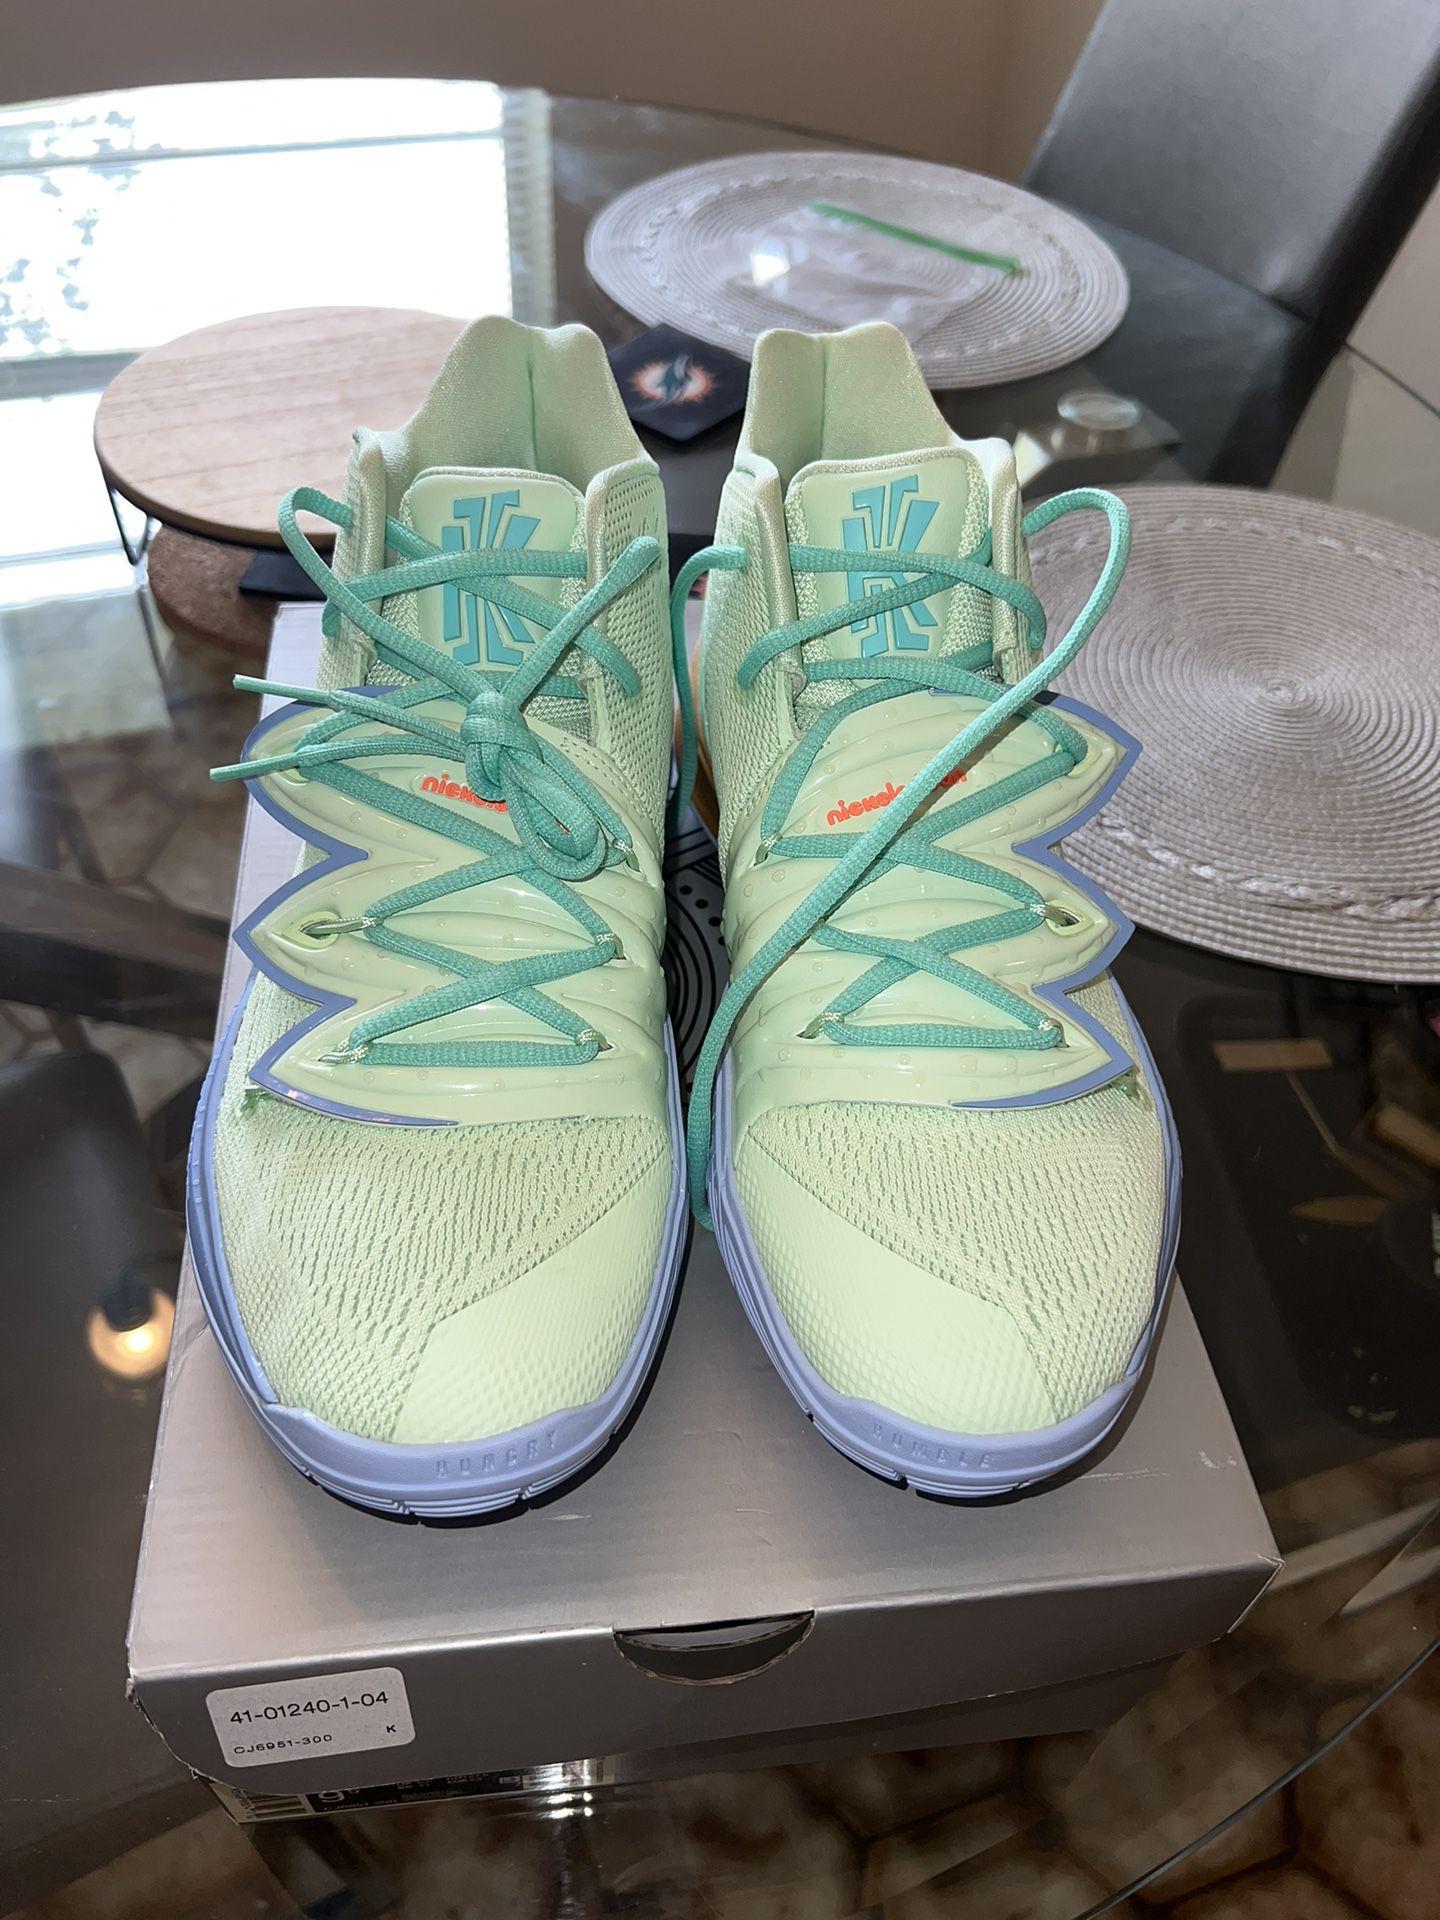 5 Size 9.5 for Sale in Hollywood, FL - OfferUp